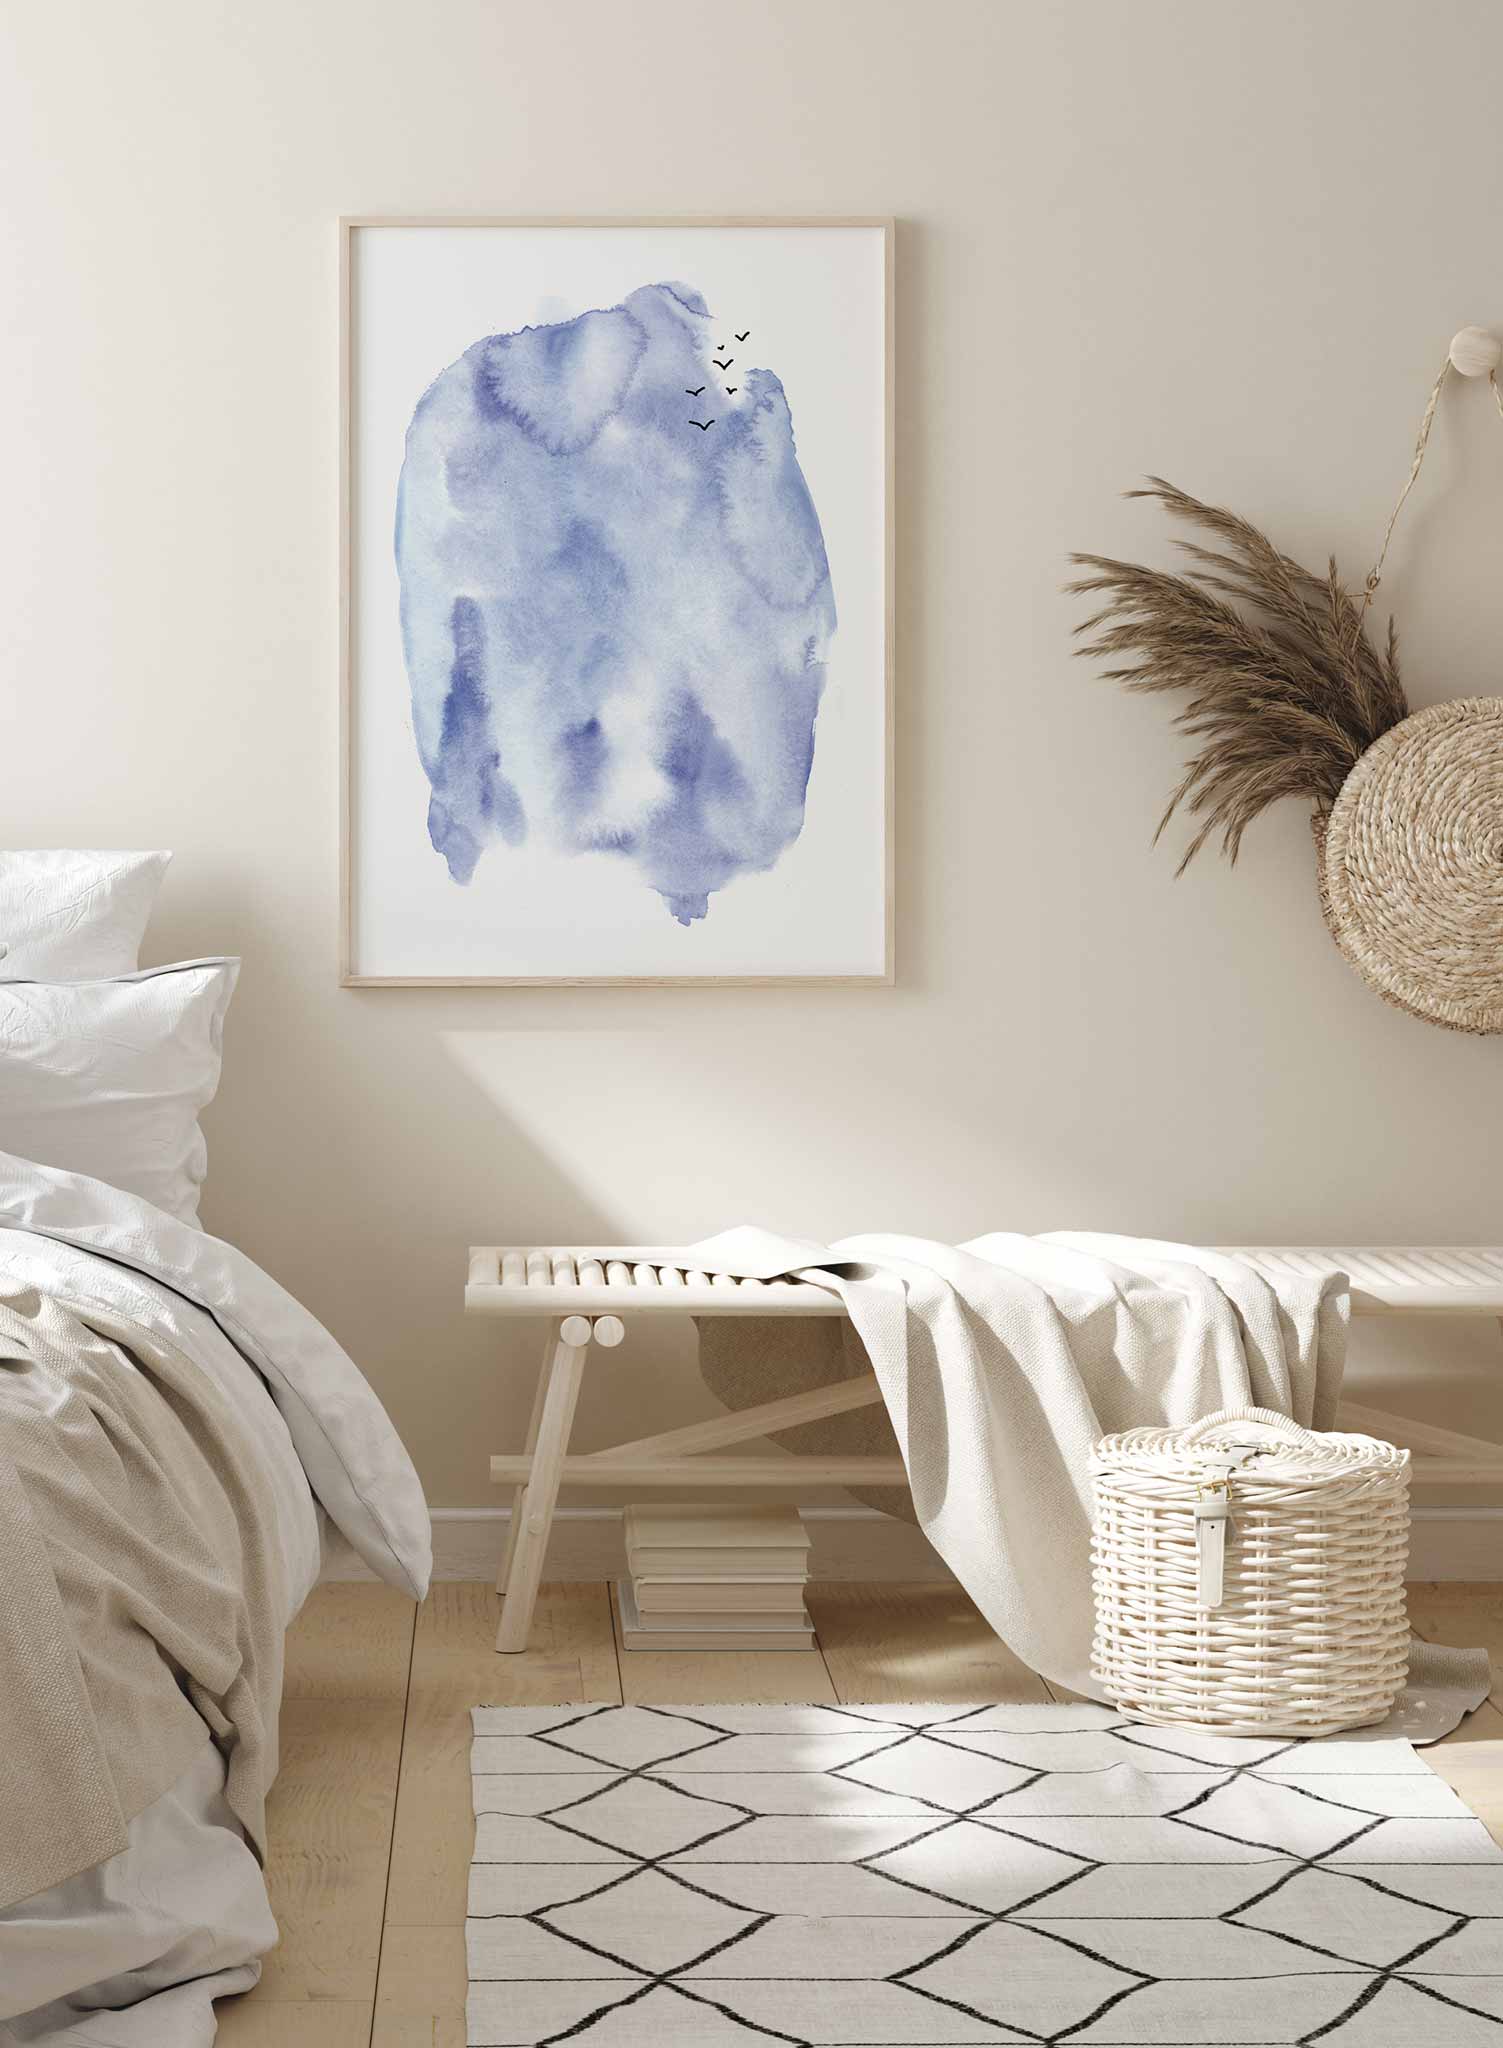 Nautical Dream is a minimalist illustration of a hazy blue cloud with birds flying out of it by Opposite Wall.